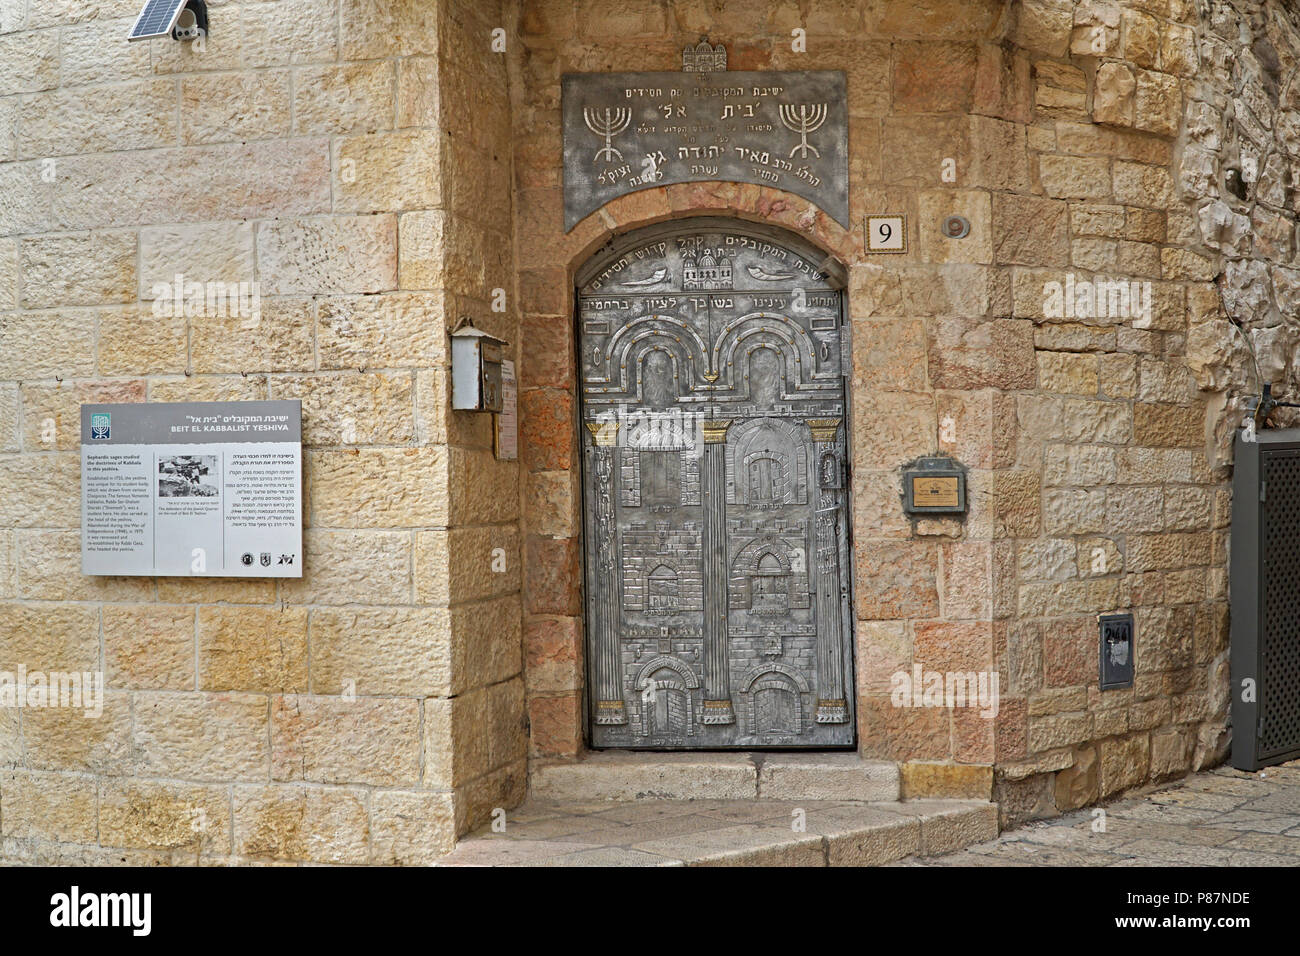 Jerusalem, historic synagogue door with ornate decorations Stock Photo